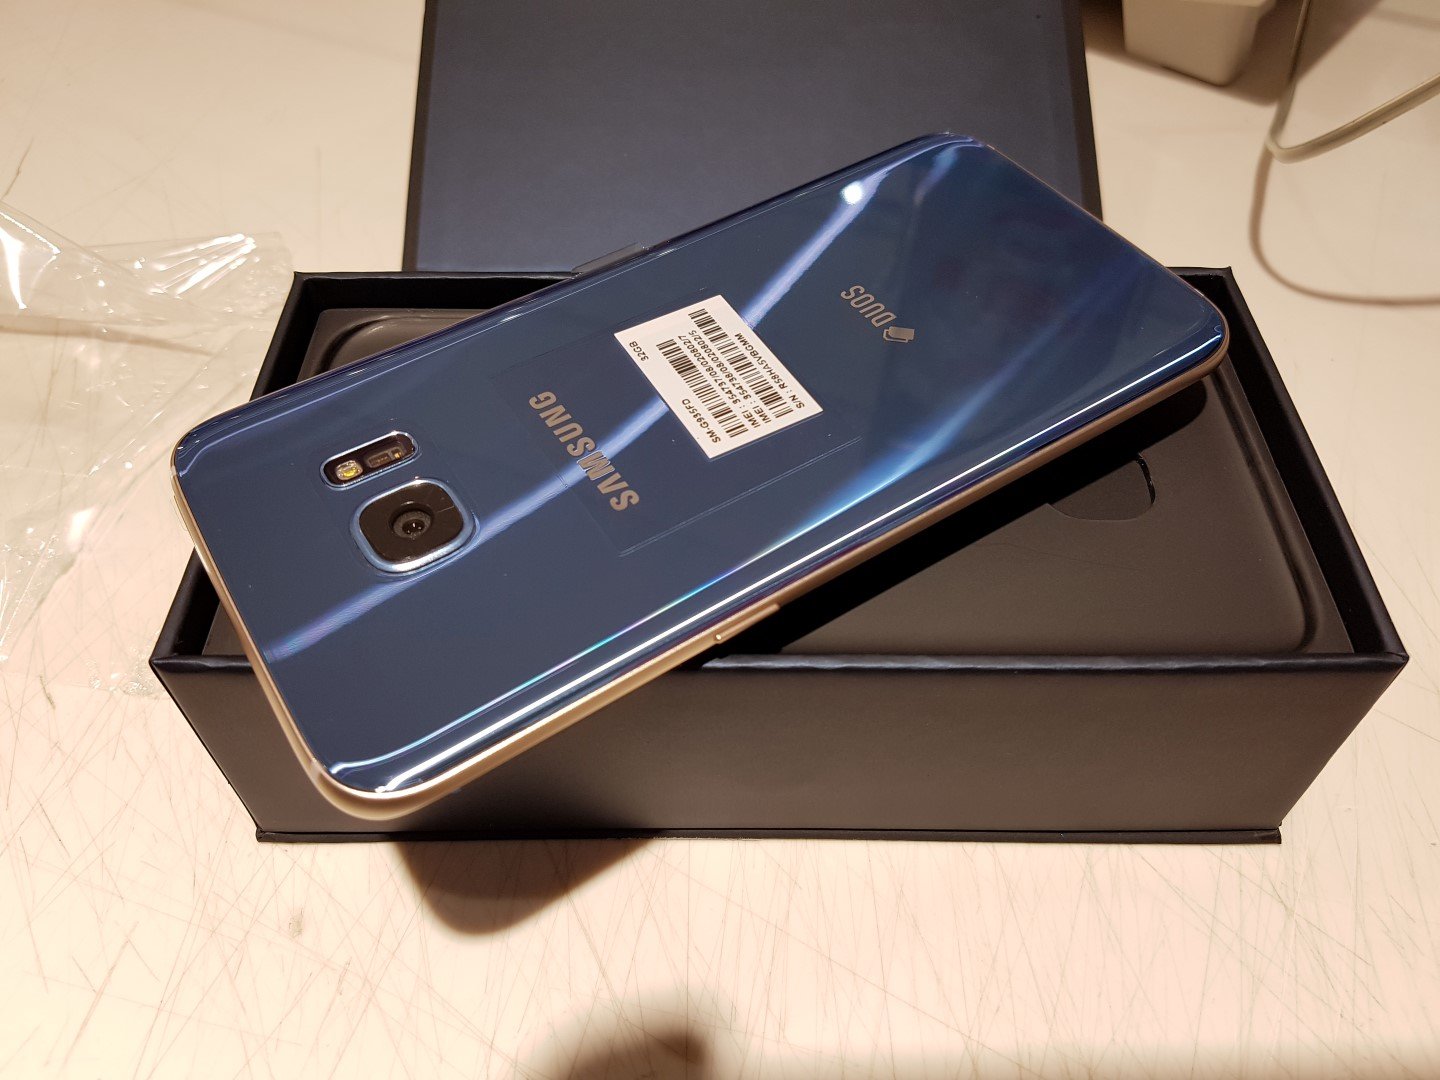 schudden Ontwarren Vervullen Check out these pictures of the Blue Coral Galaxy S7 edge unboxing -  SamMobile - SamMobile